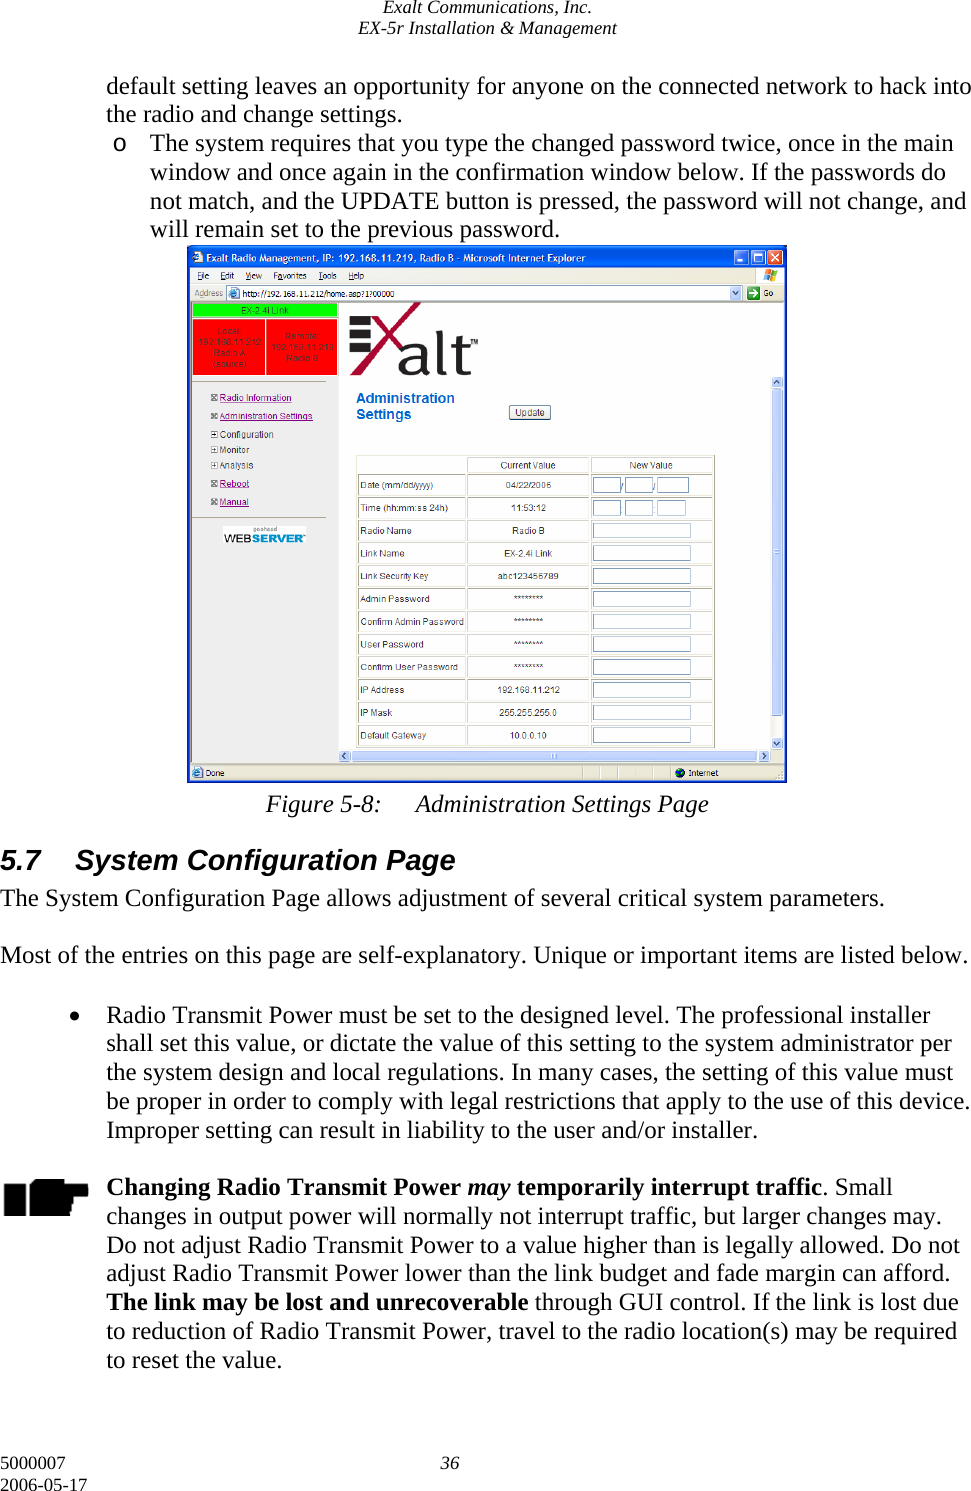 Exalt Communications, Inc. EX-5r Installation &amp; Management 5000007  36 2006-05-17 default setting leaves an opportunity for anyone on the connected network to hack into the radio and change settings. o The system requires that you type the changed password twice, once in the main window and once again in the confirmation window below. If the passwords do not match, and the UPDATE button is pressed, the password will not change, and will remain set to the previous password.                    Figure 5-8:  Administration Settings Page 5.7  System Configuration Page The System Configuration Page allows adjustment of several critical system parameters.   Most of the entries on this page are self-explanatory. Unique or important items are listed below.  • Radio Transmit Power must be set to the designed level. The professional installer shall set this value, or dictate the value of this setting to the system administrator per the system design and local regulations. In many cases, the setting of this value must be proper in order to comply with legal restrictions that apply to the use of this device. Improper setting can result in liability to the user and/or installer.  Changing Radio Transmit Power may temporarily interrupt traffic. Small changes in output power will normally not interrupt traffic, but larger changes may. Do not adjust Radio Transmit Power to a value higher than is legally allowed. Do not adjust Radio Transmit Power lower than the link budget and fade margin can afford. The link may be lost and unrecoverable through GUI control. If the link is lost due to reduction of Radio Transmit Power, travel to the radio location(s) may be required to reset the value.  